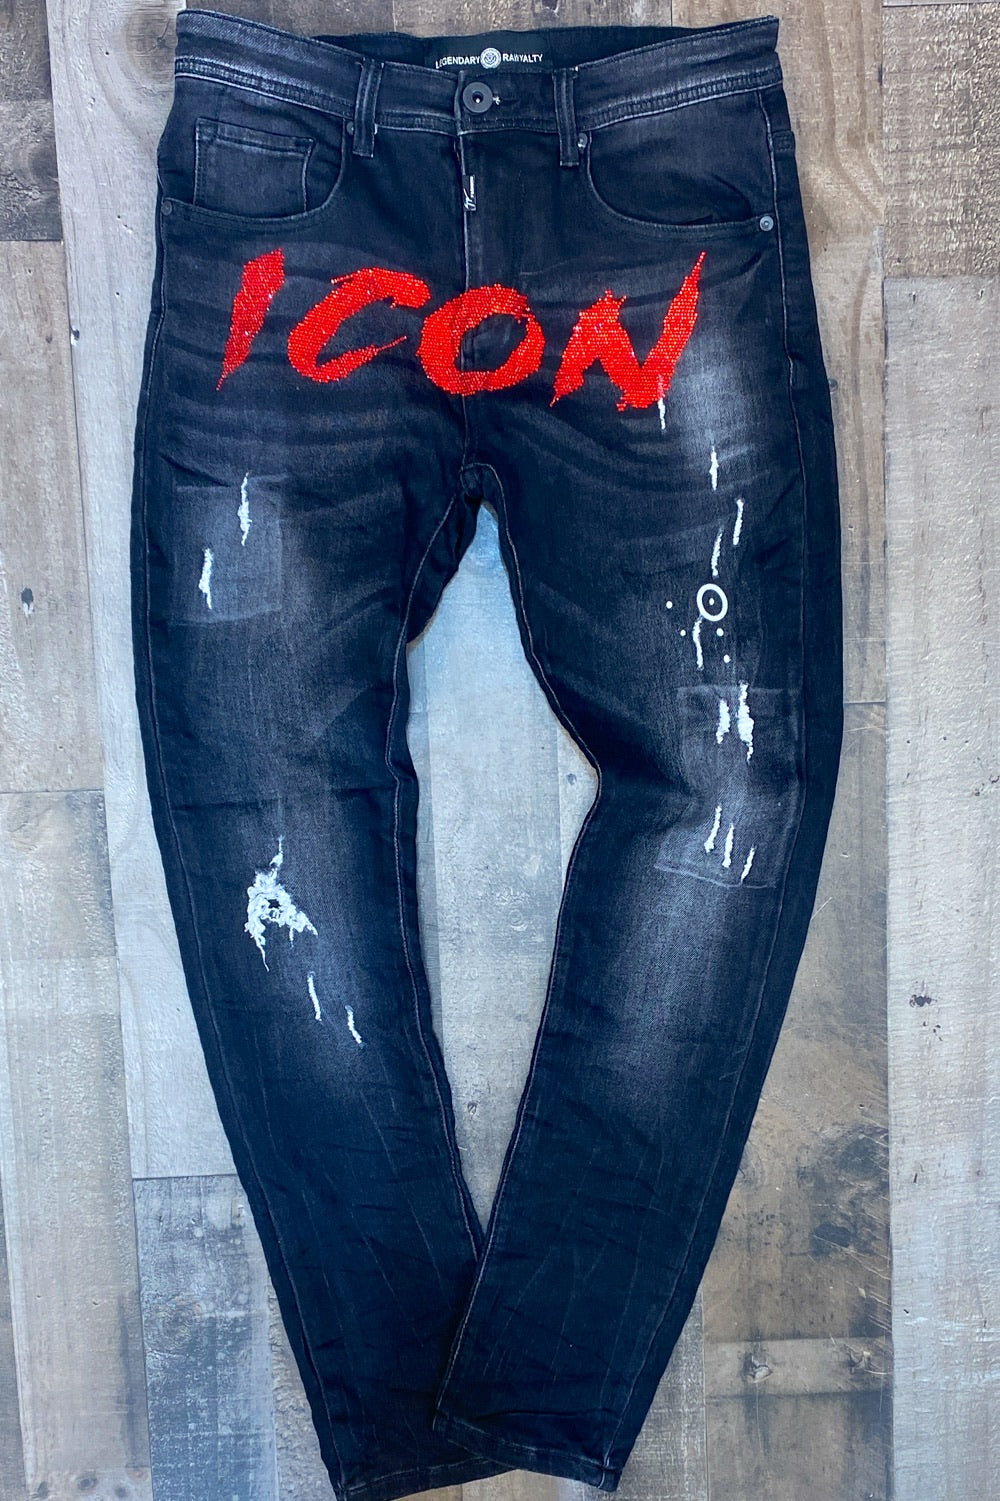 Rawyalty- Icon jeans (black/red)